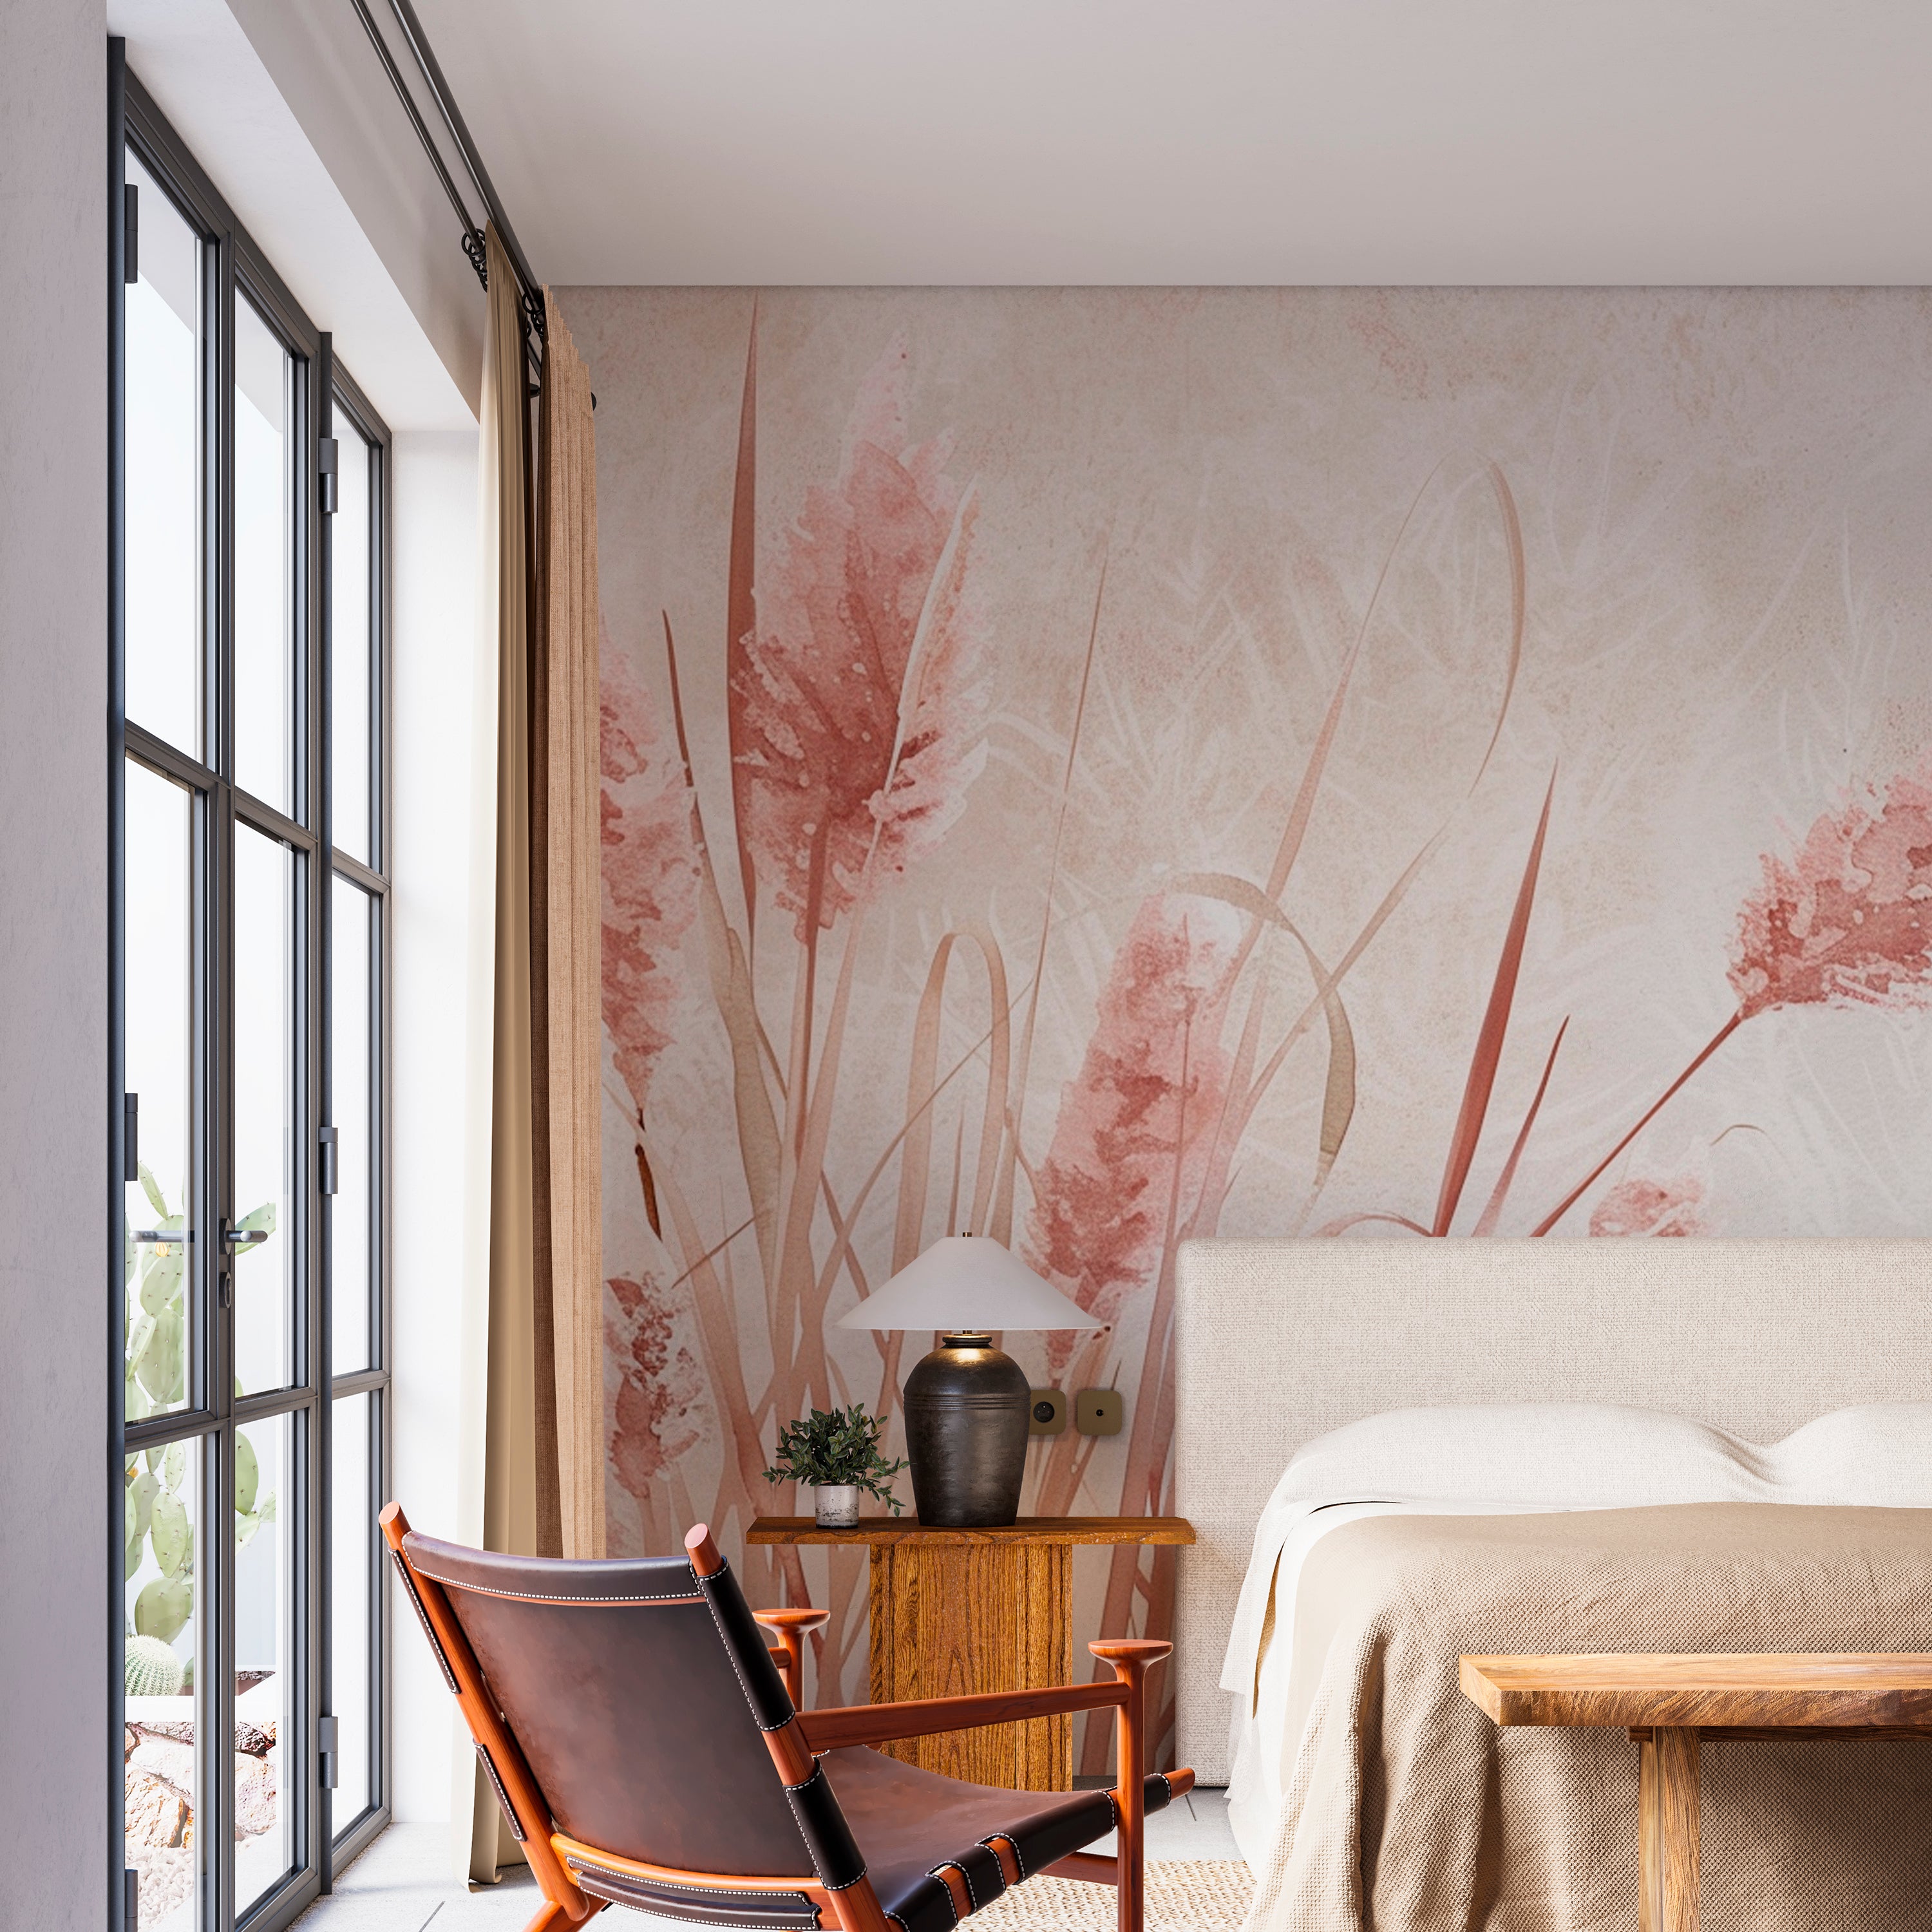 Pastel Reeds: Delicate Nature for a Serene Interior